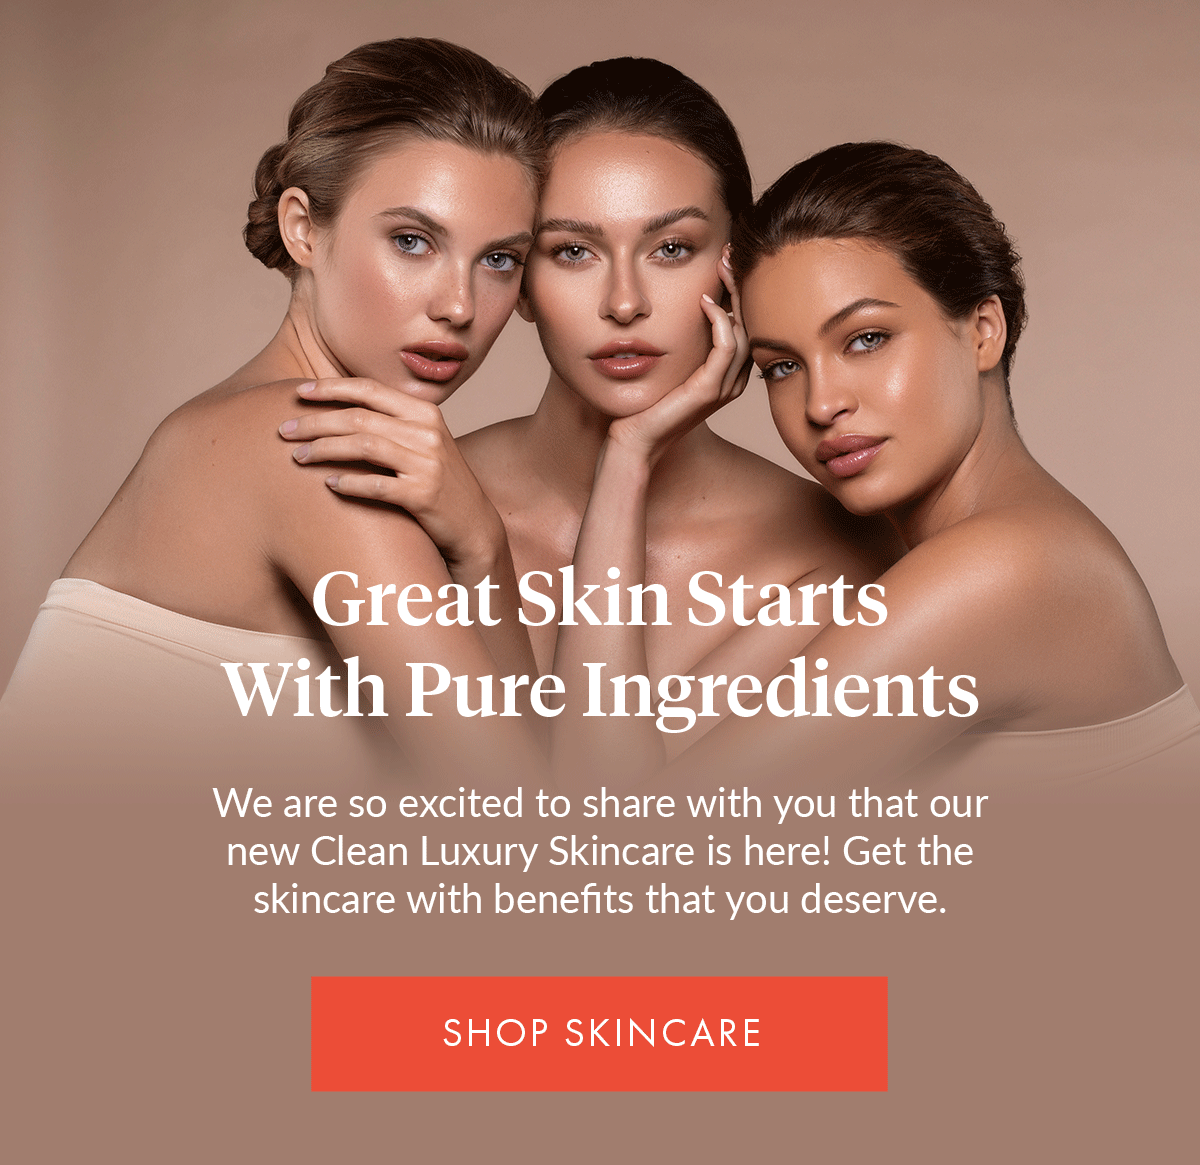 Great skin starts with pure ingredients